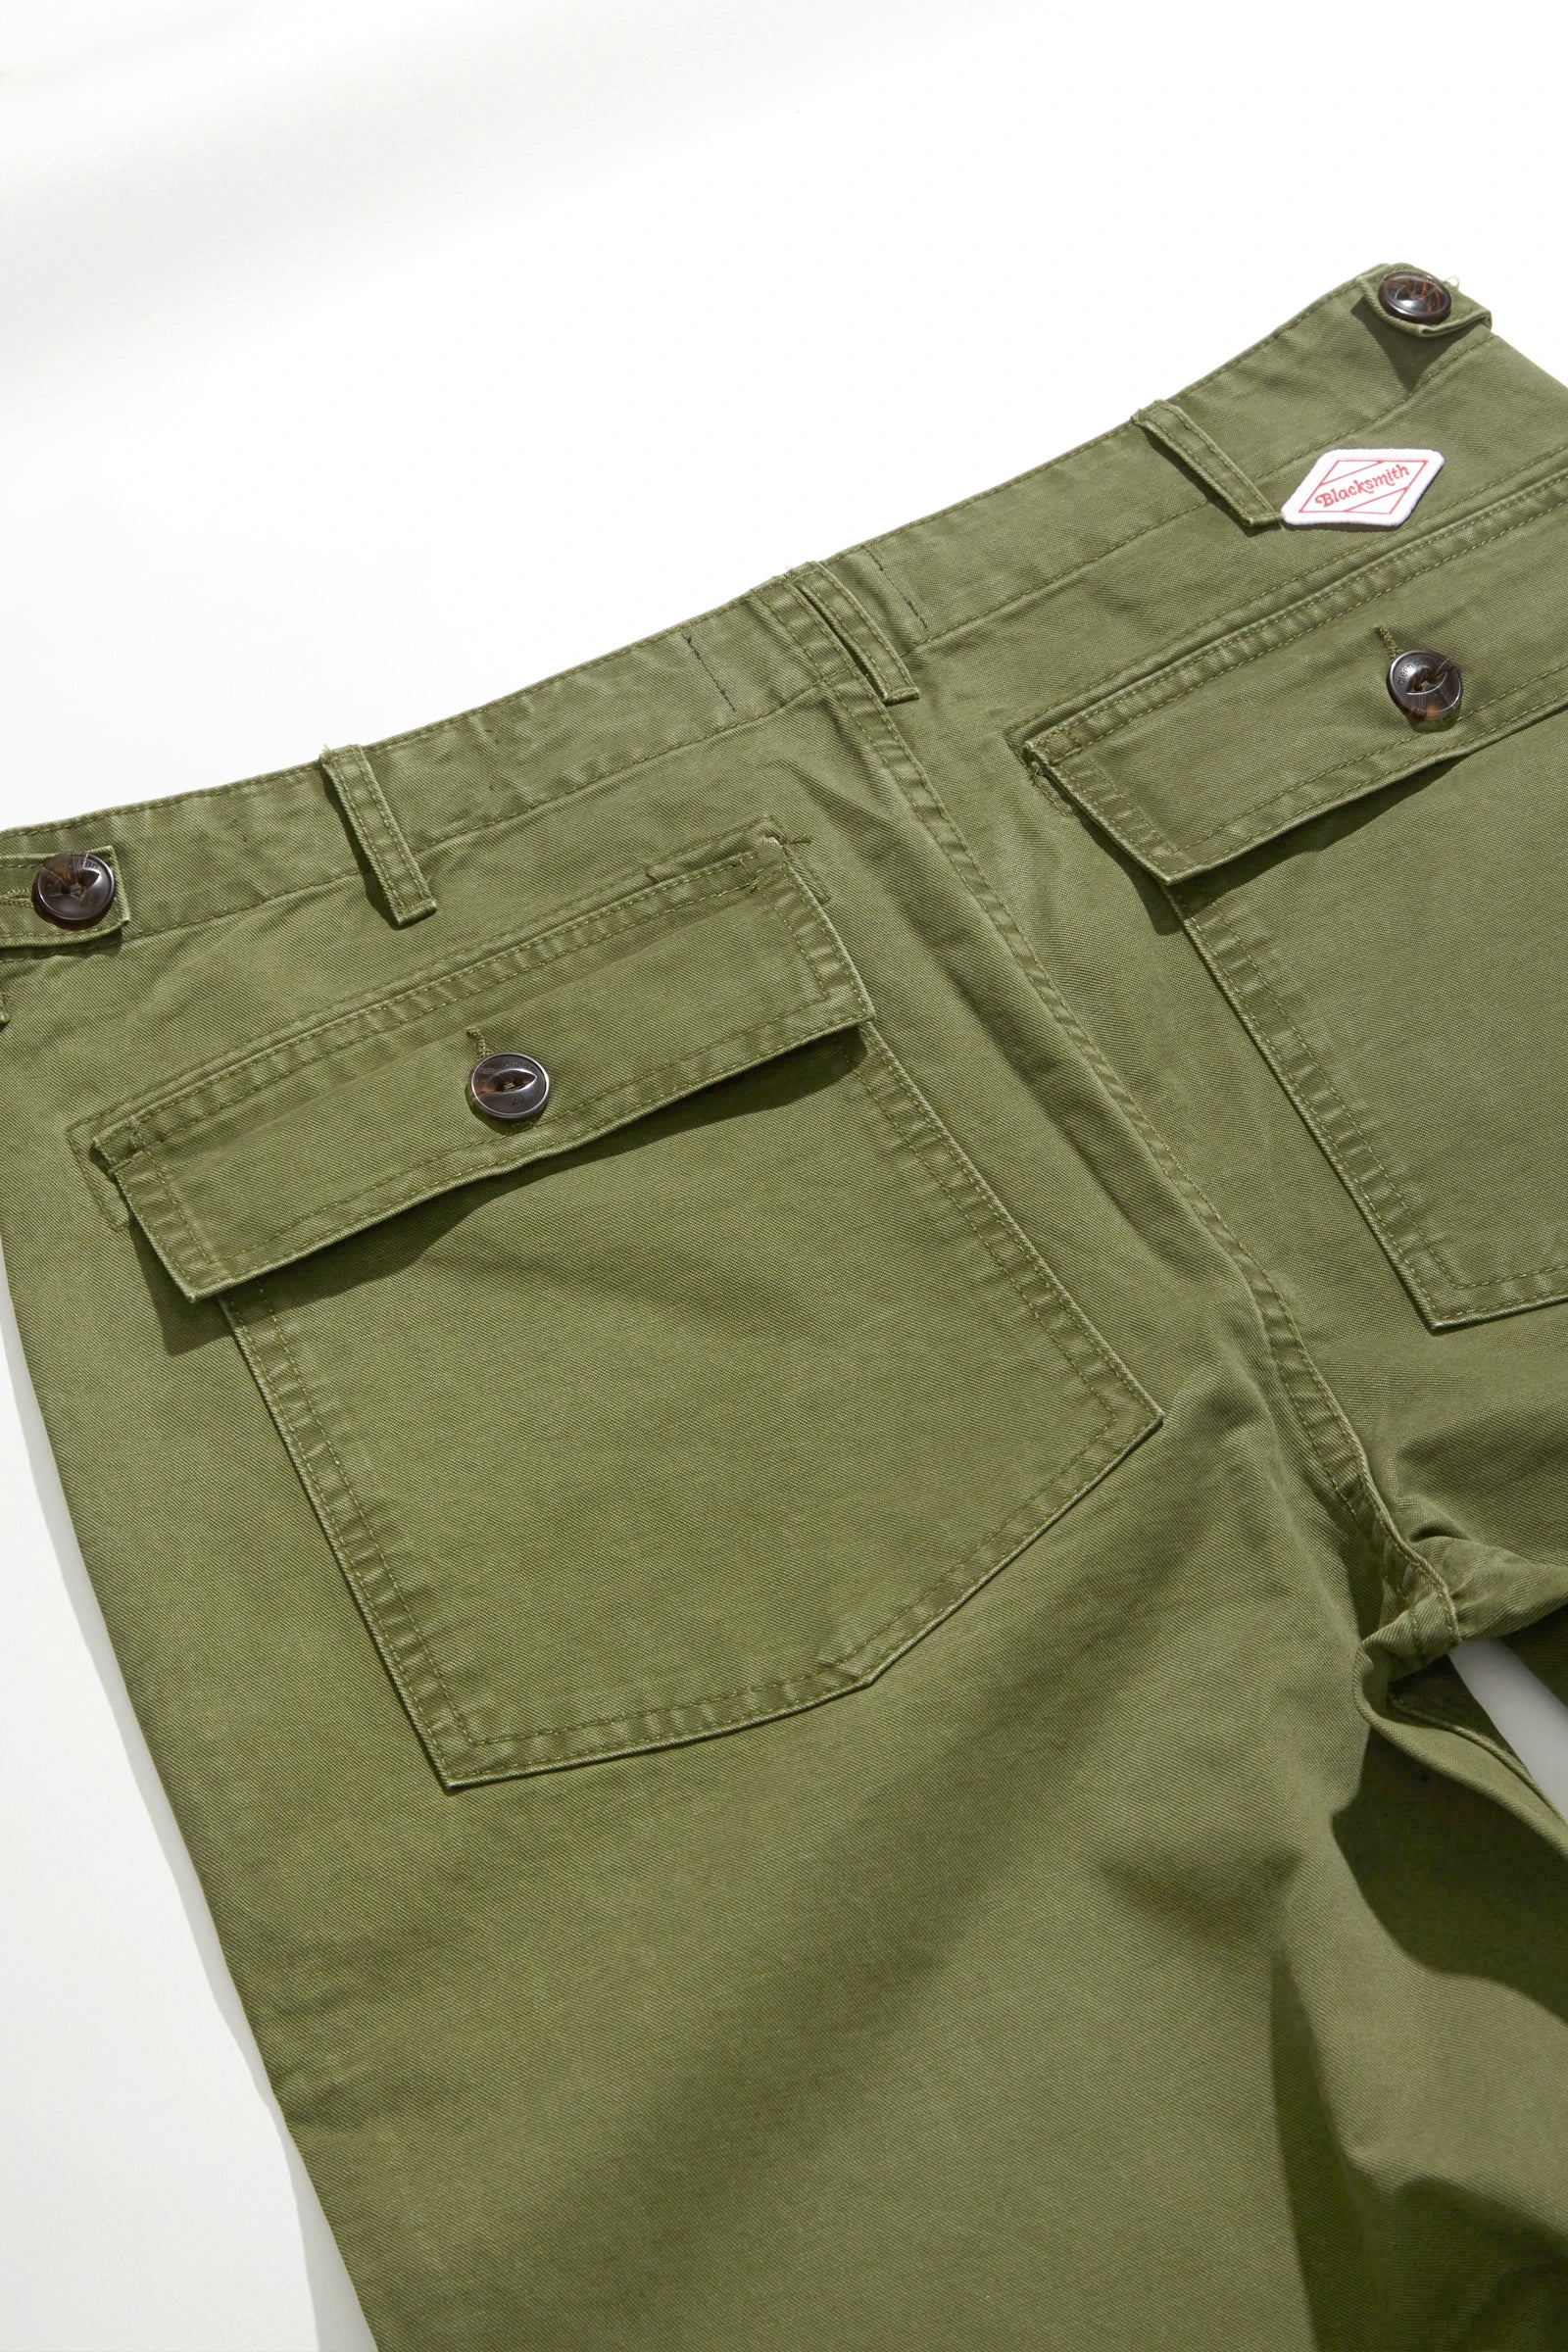 Blacksmith - Sowing Field Pants - Olive